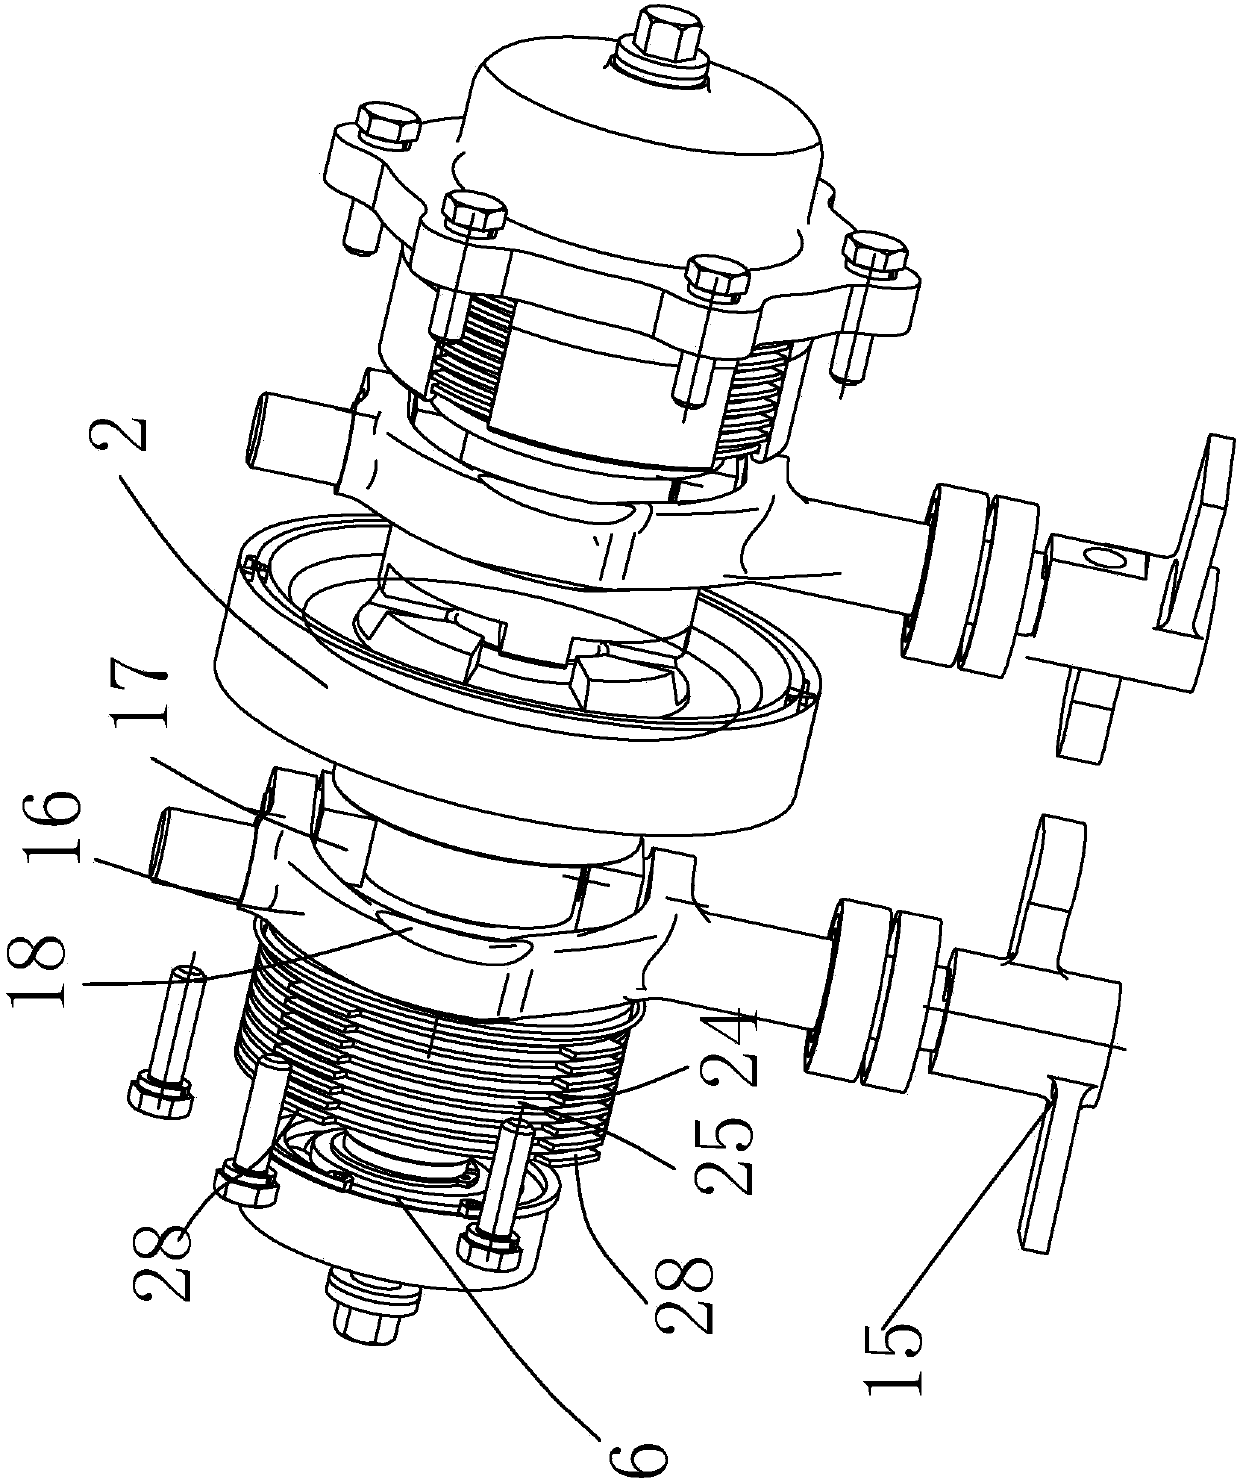 A steering clutch driving mechanism of a combine harvester